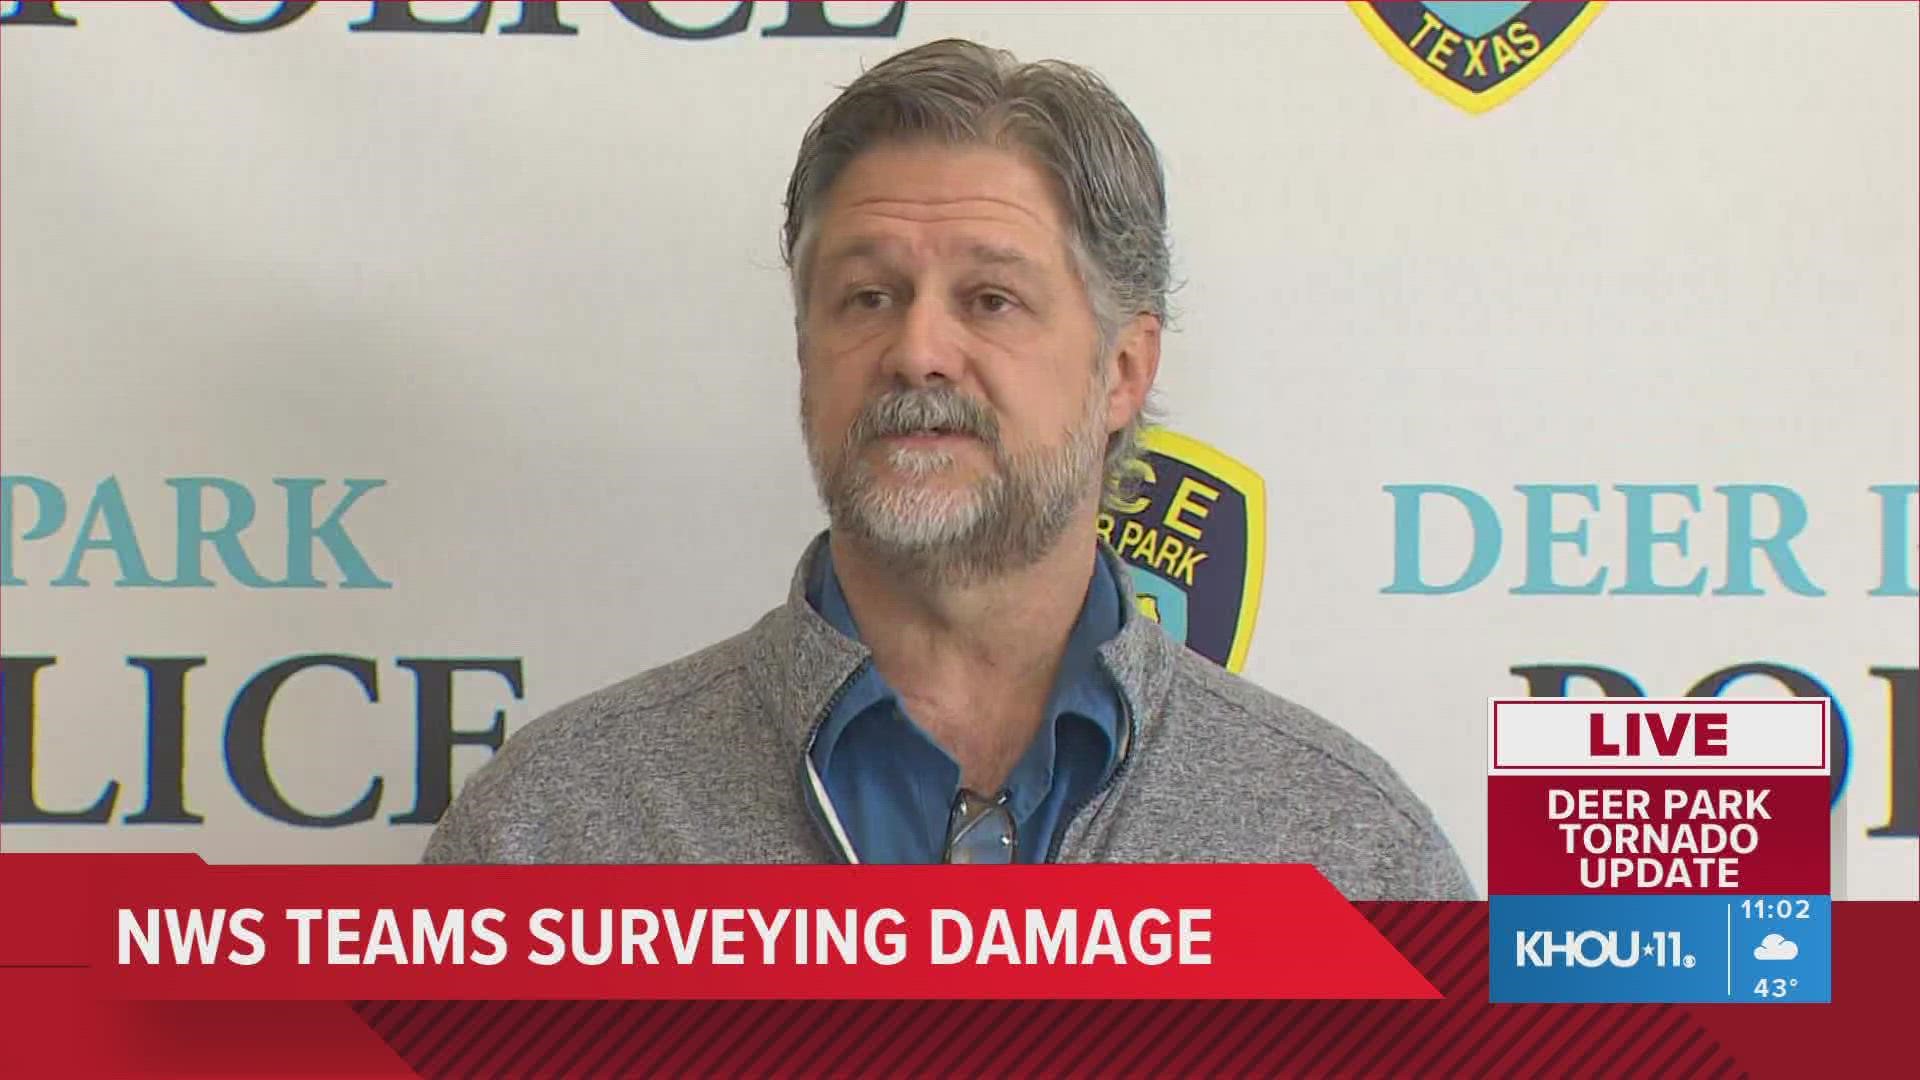 Deer Park officials gave an update on storm damage after a tornado swept through the area on Tuesday.